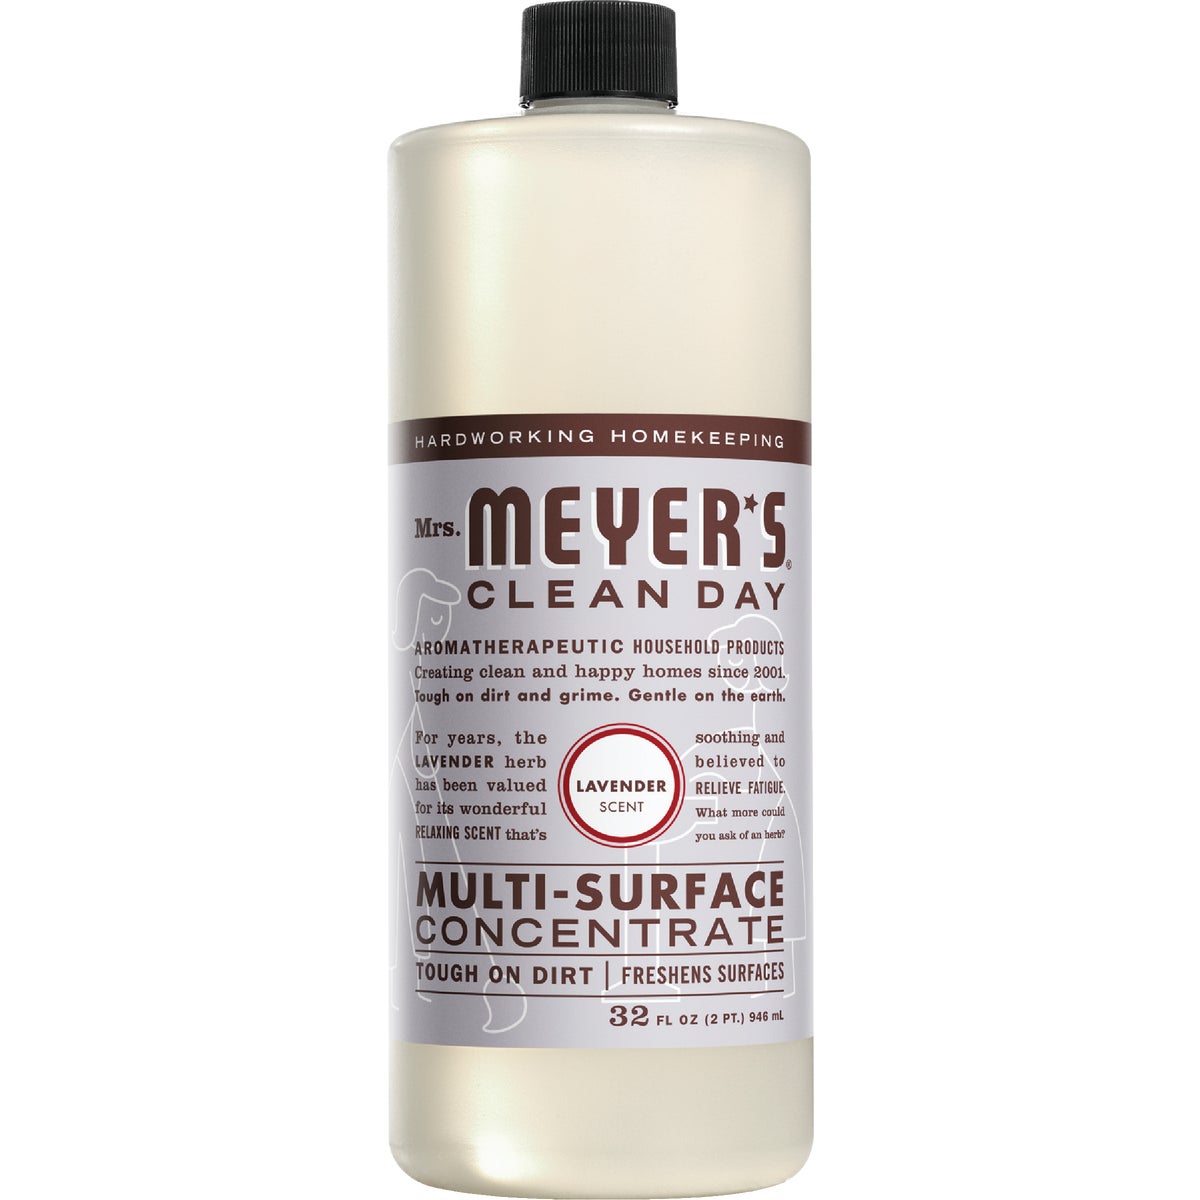 Mrs. Meyer's Clean Day 32 Oz. Lavender Multi-Surface Concentrate